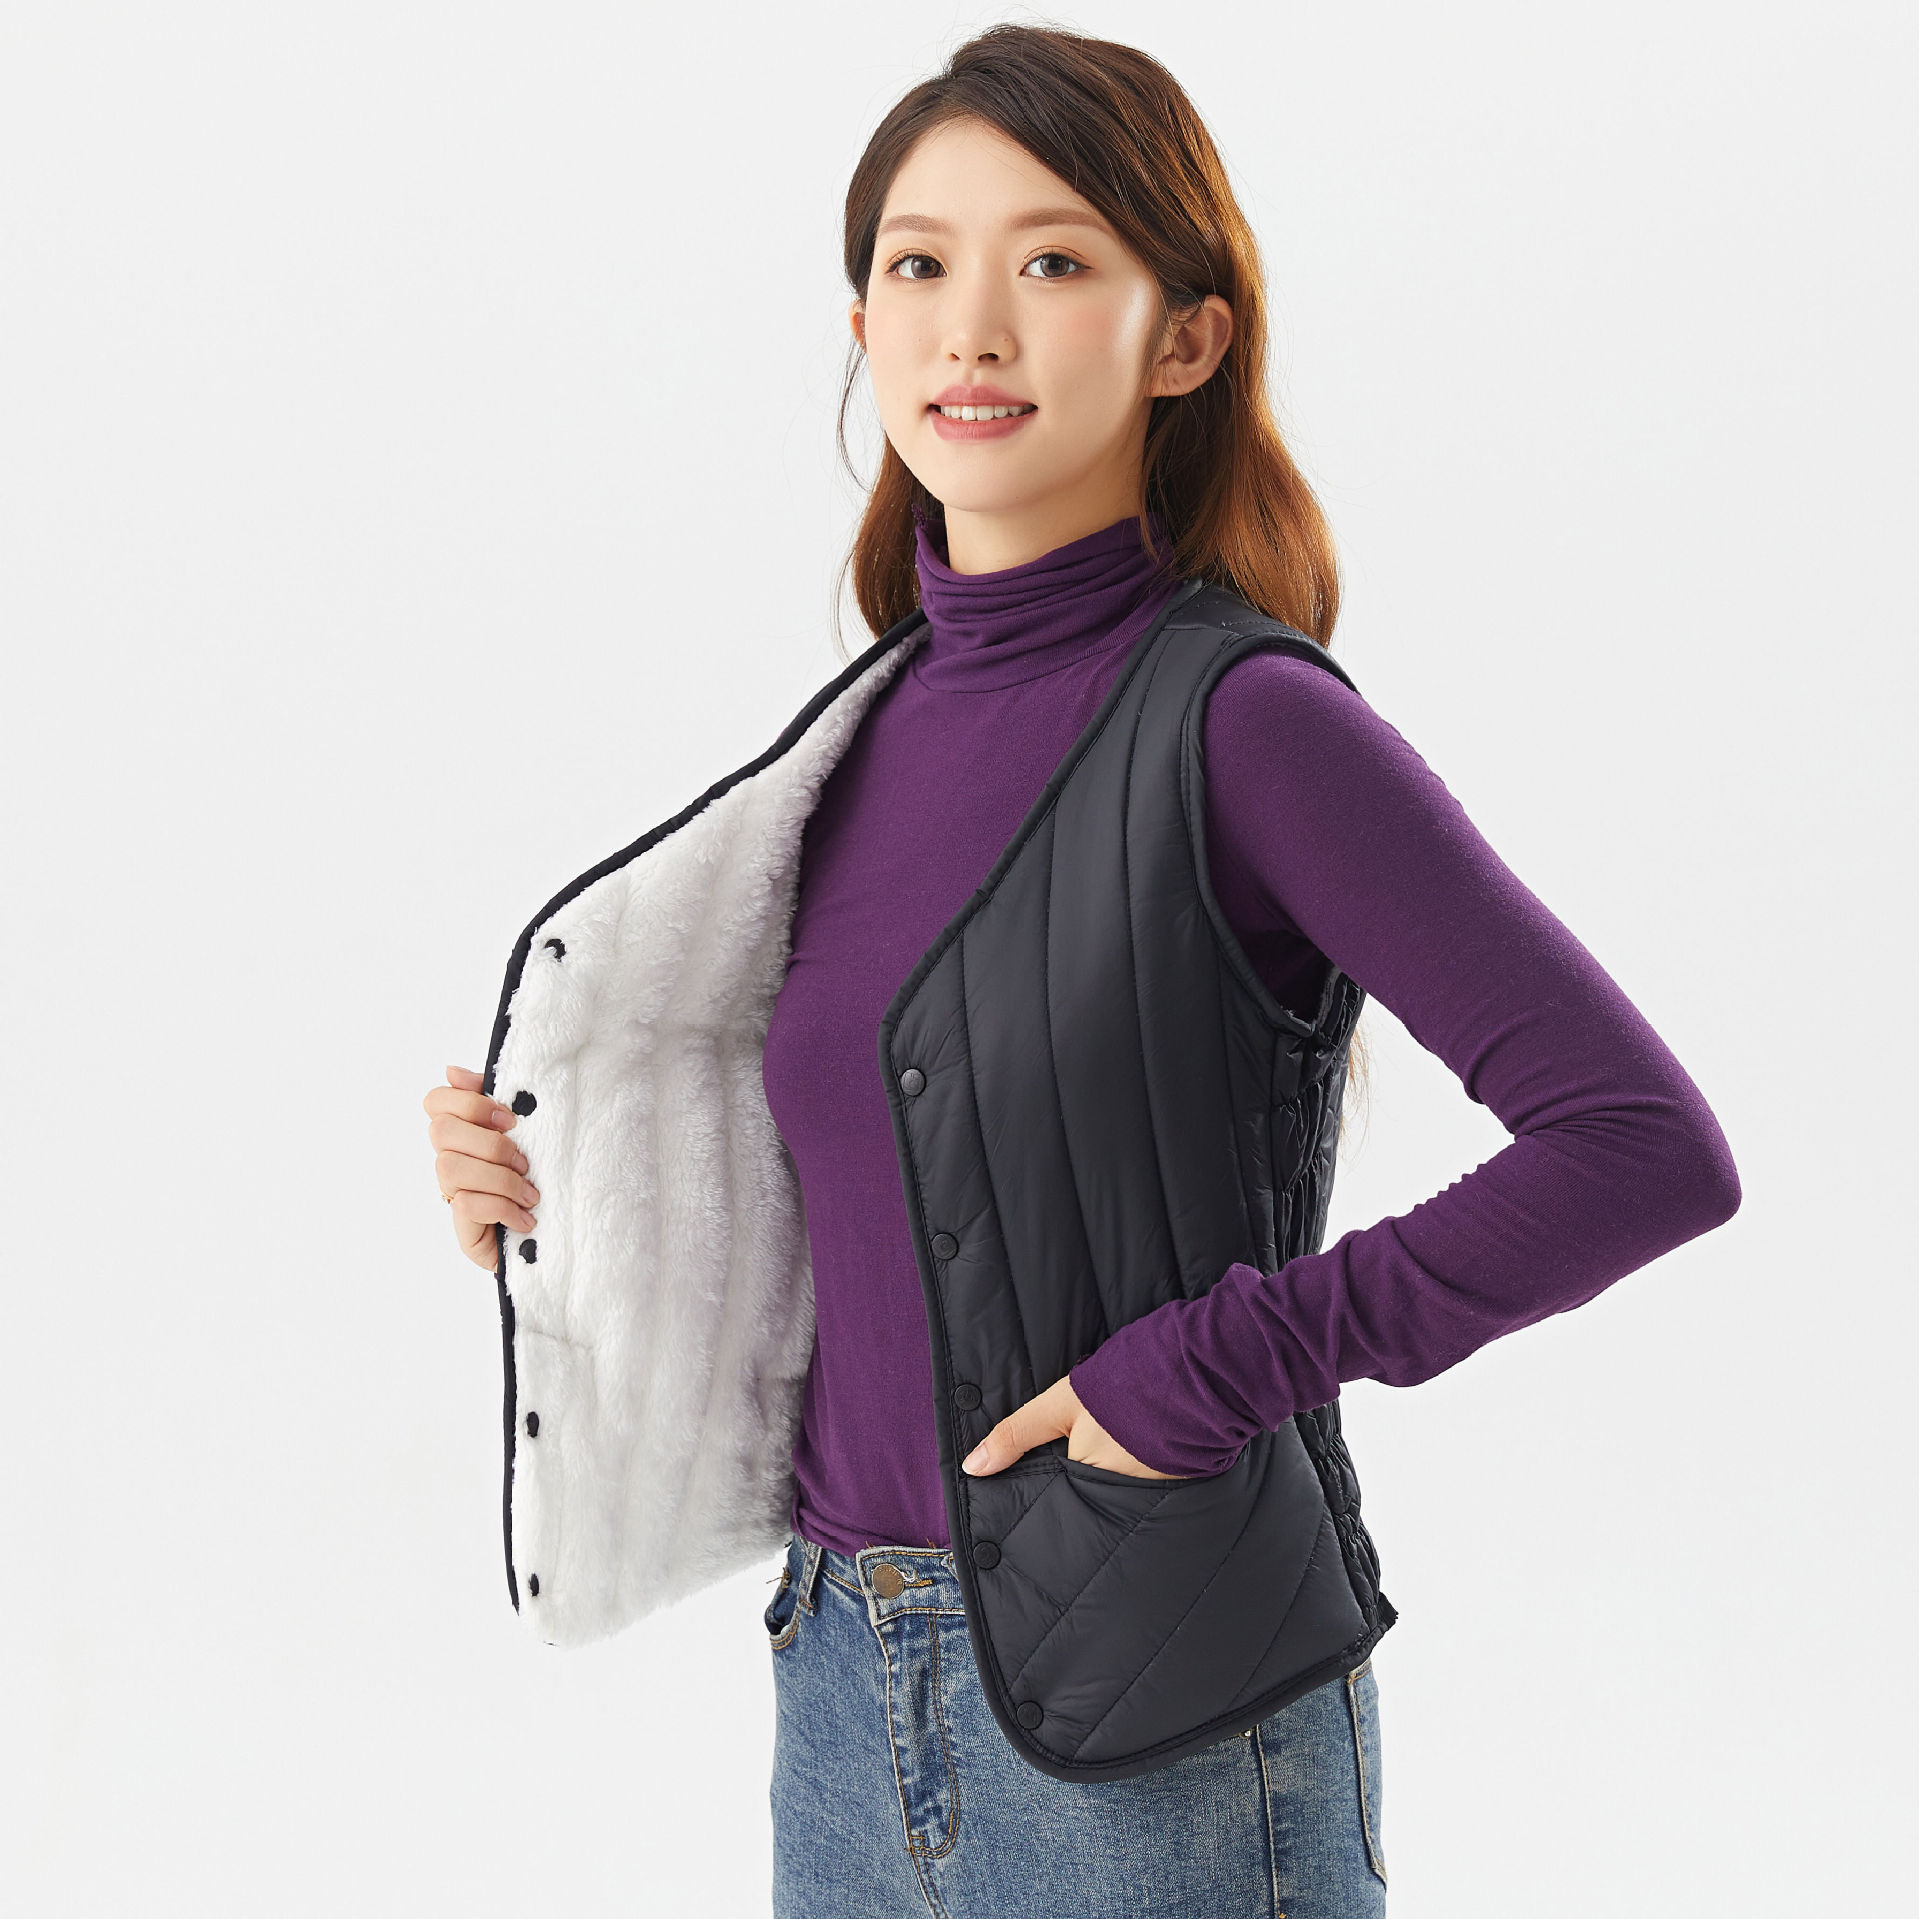 Women's Winter Warm Extra-large Thickened Fleece-lined Middle-aged and Elderly Women's 8703 Fleece Wool Cotton Vest